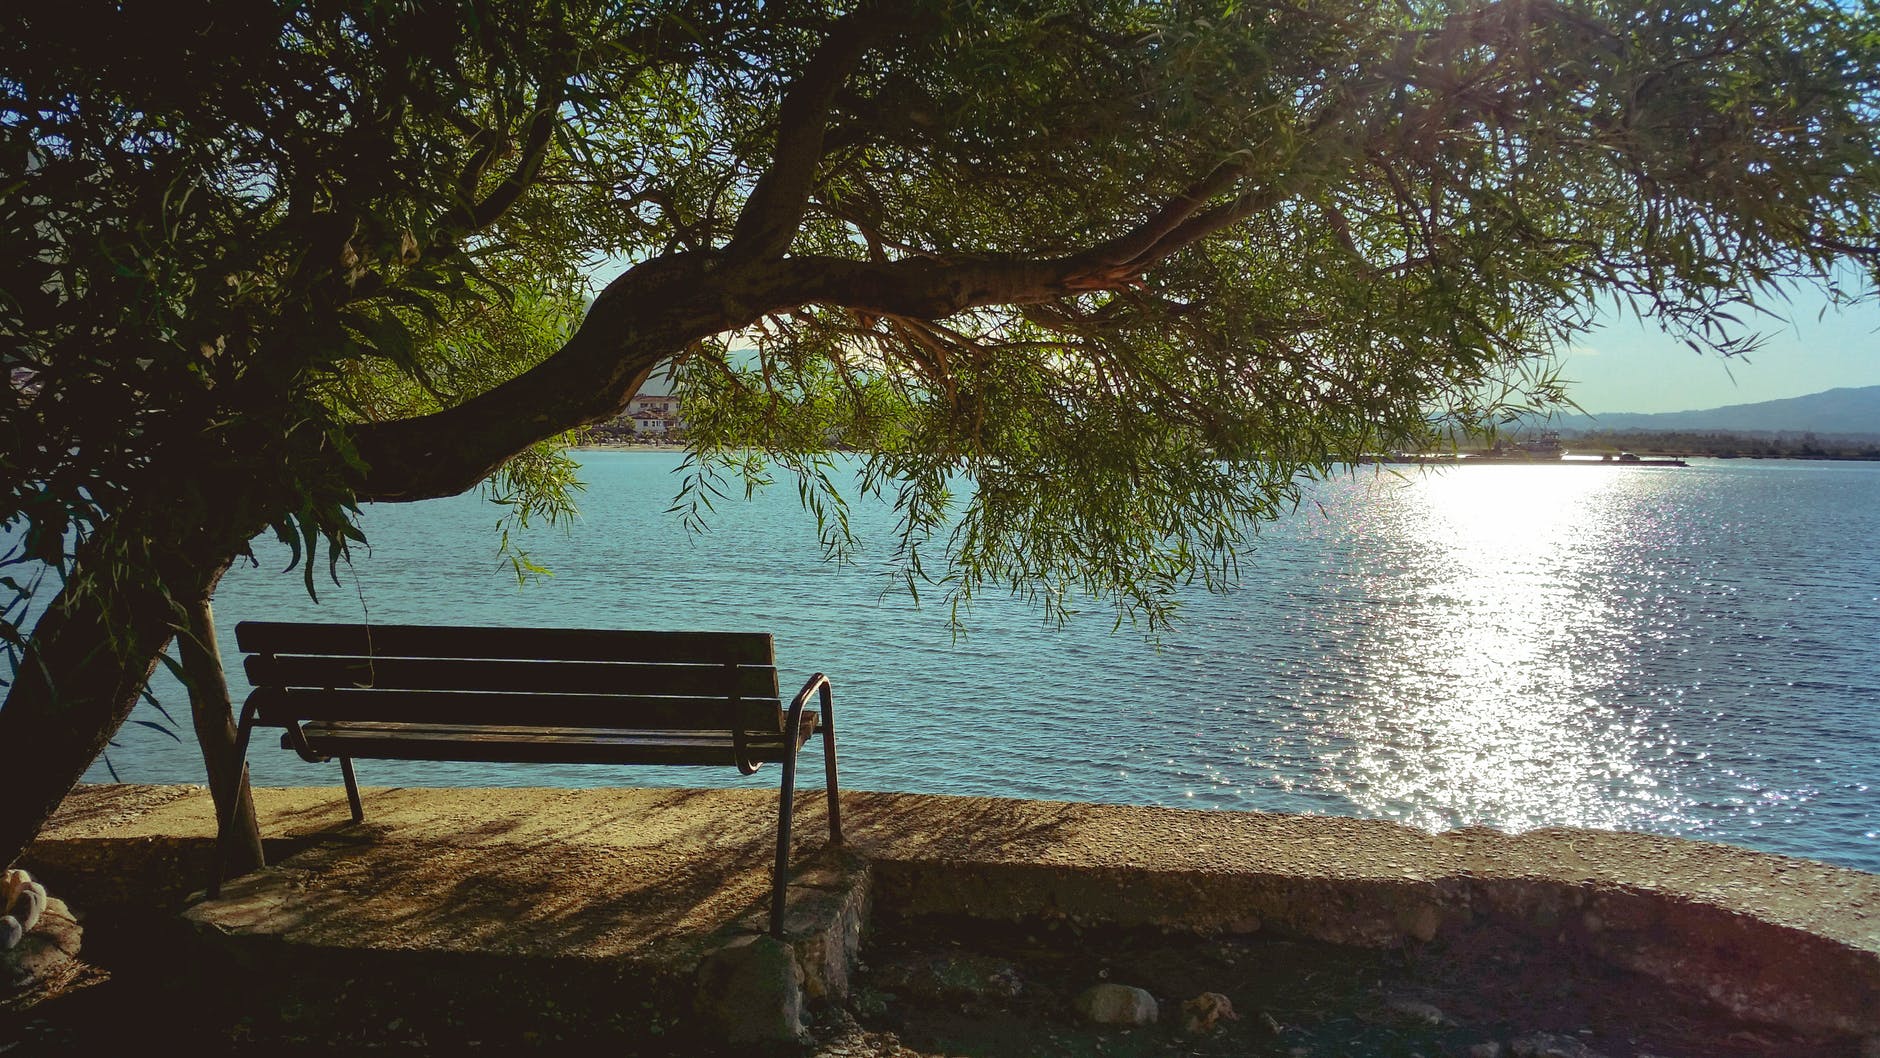 bench under tree during day beside body of water